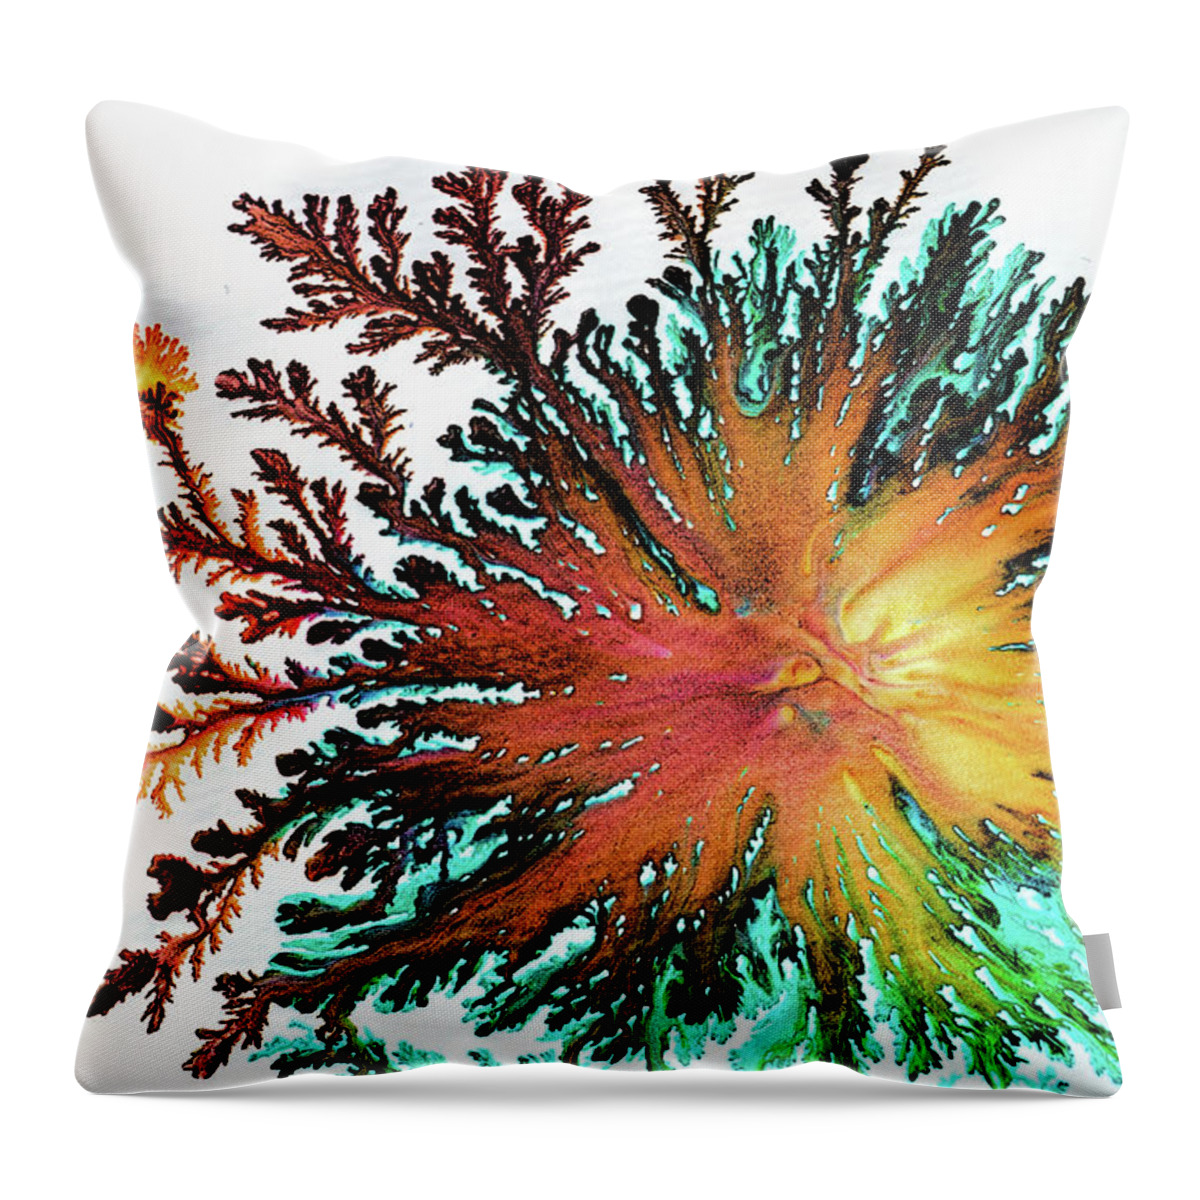 Organic Throw Pillow featuring the painting Organic art 6 by Lilia S